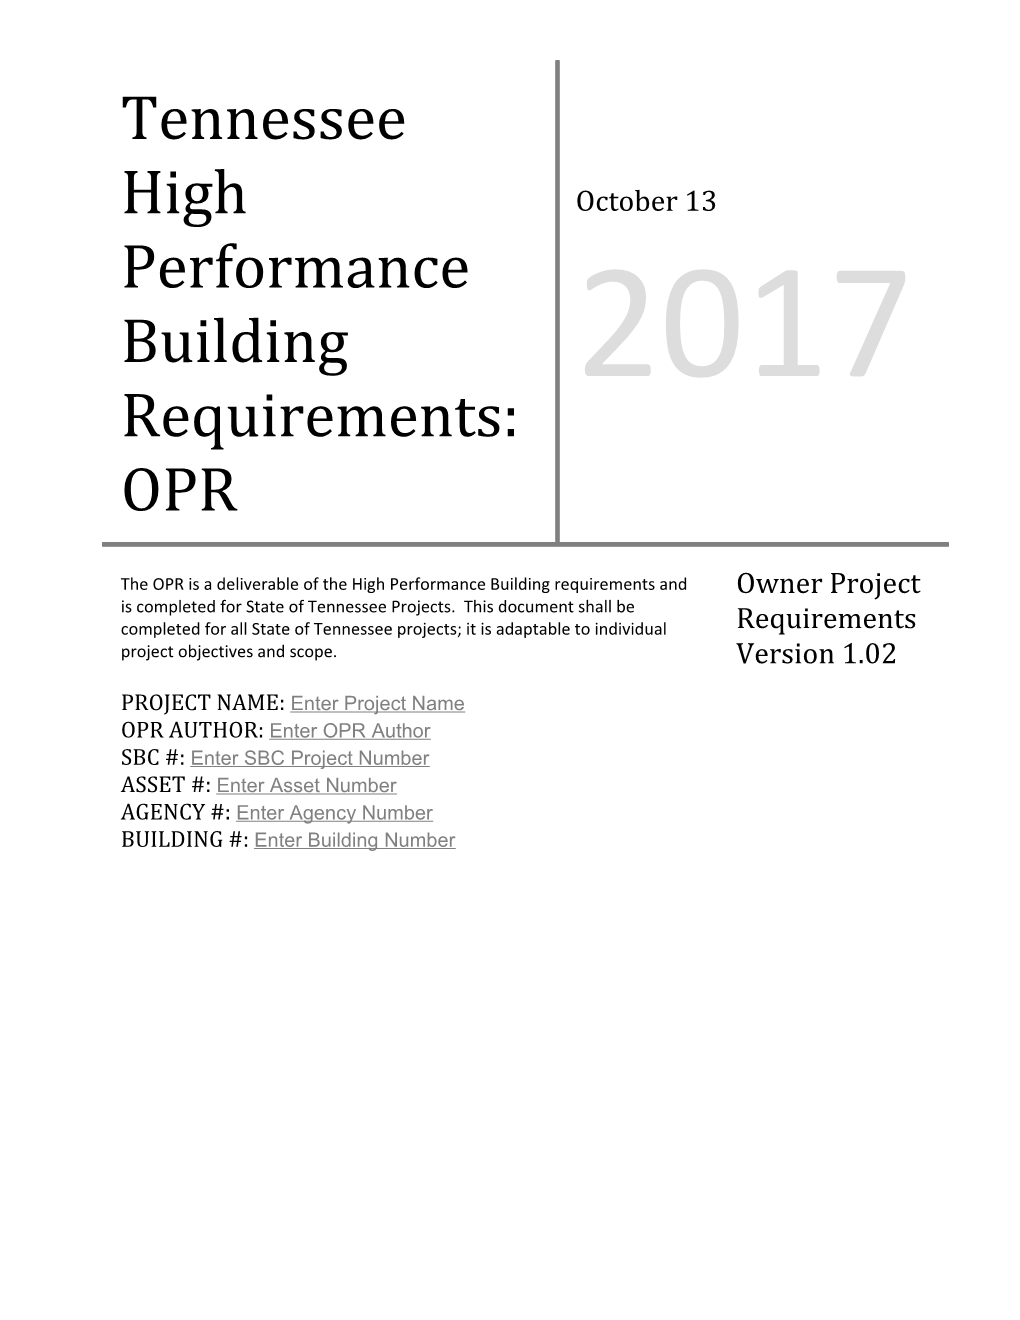 Tennessee High Performance Building Requirements: OPR